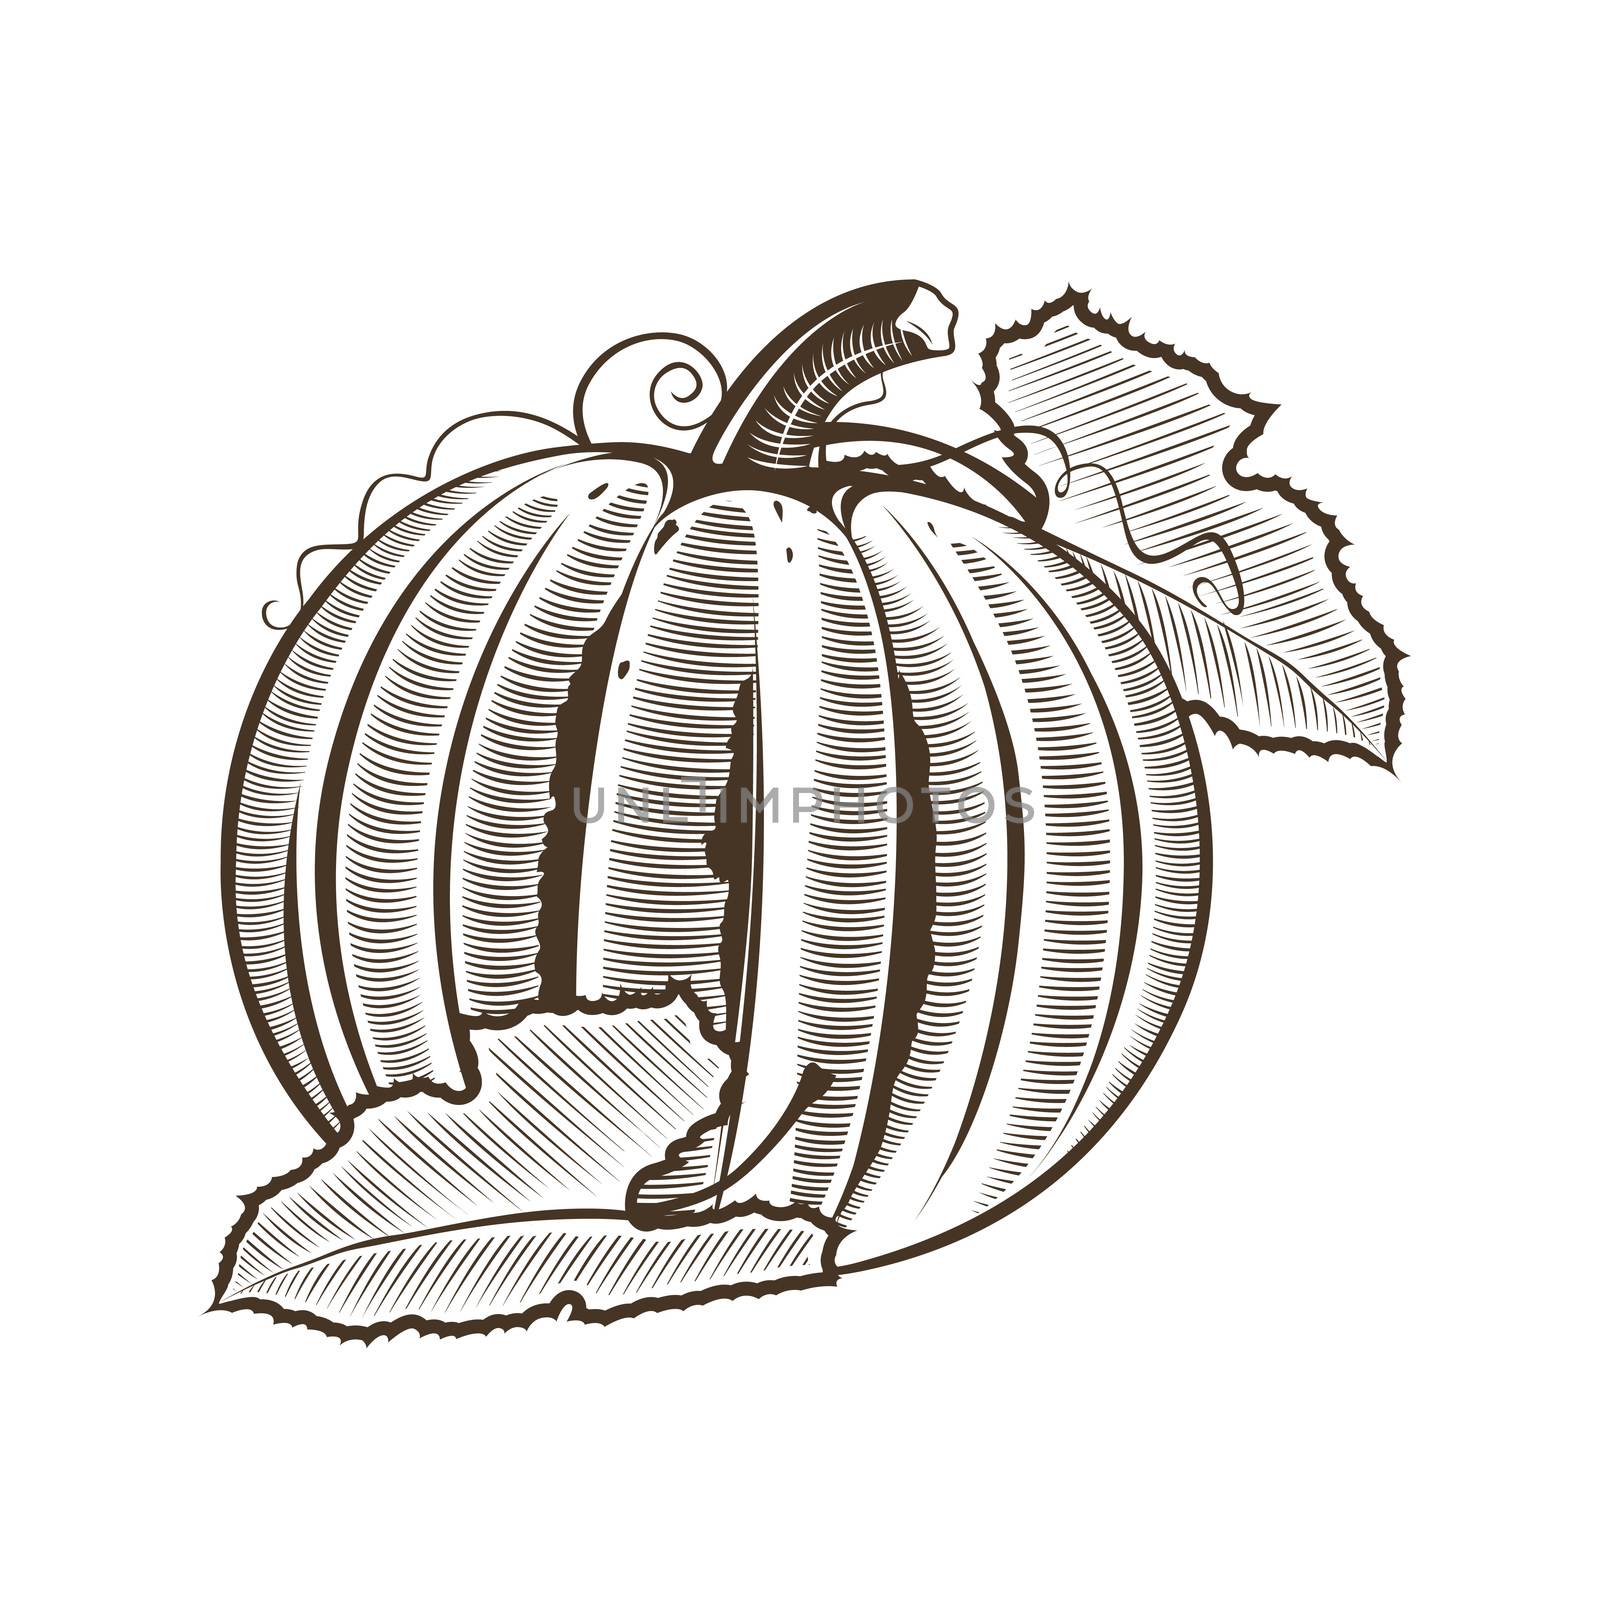 Pumpkin in vintage style by ConceptCafe